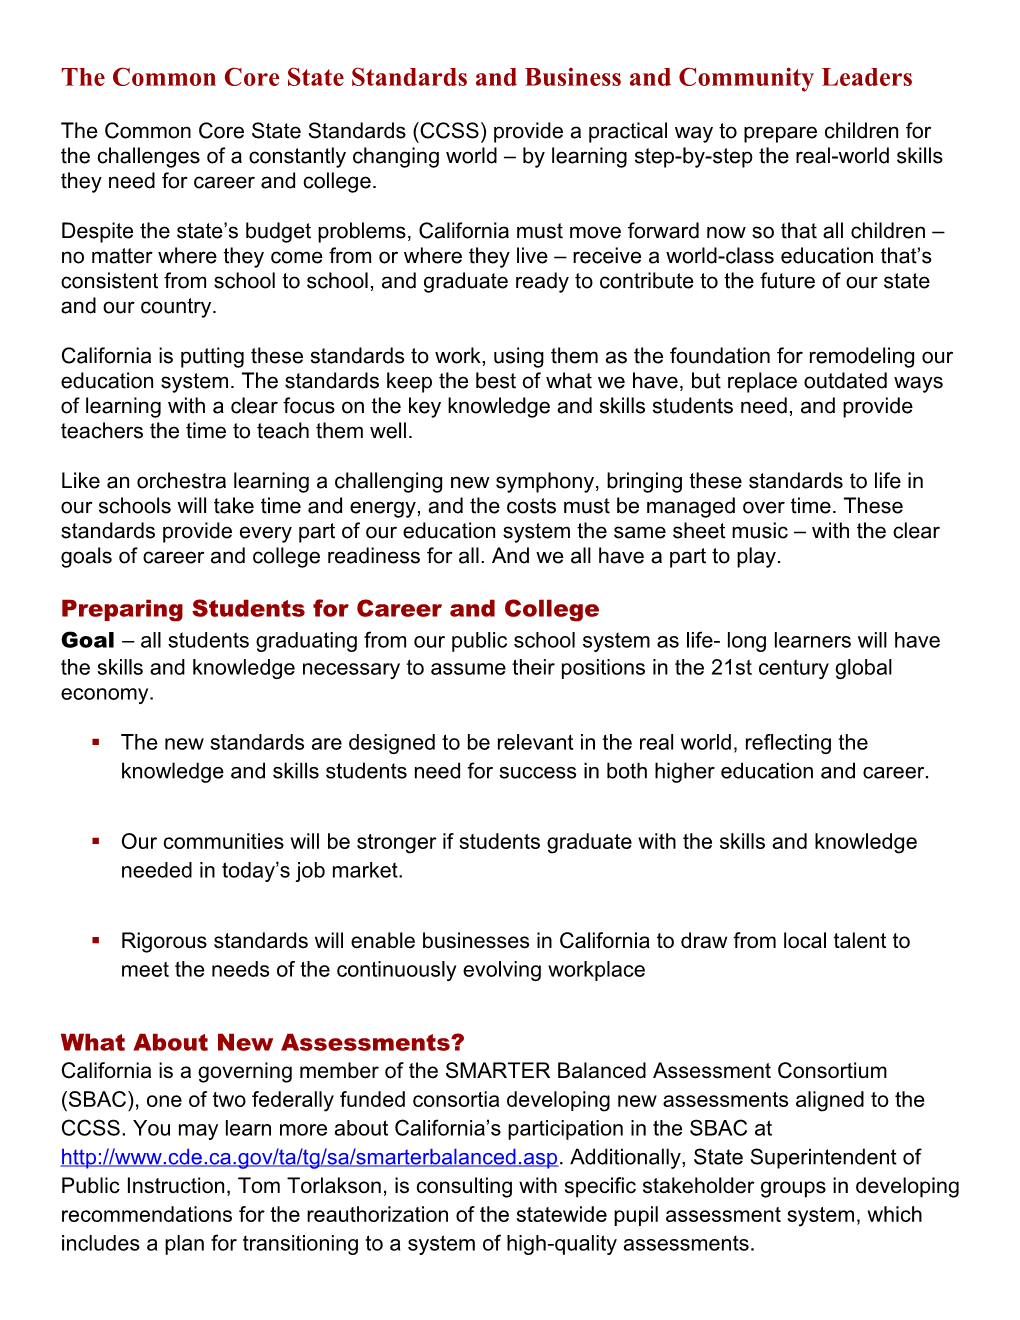 The CCSS and Business and Community Leaders - Common Core State Standards (CA Dept of Education)